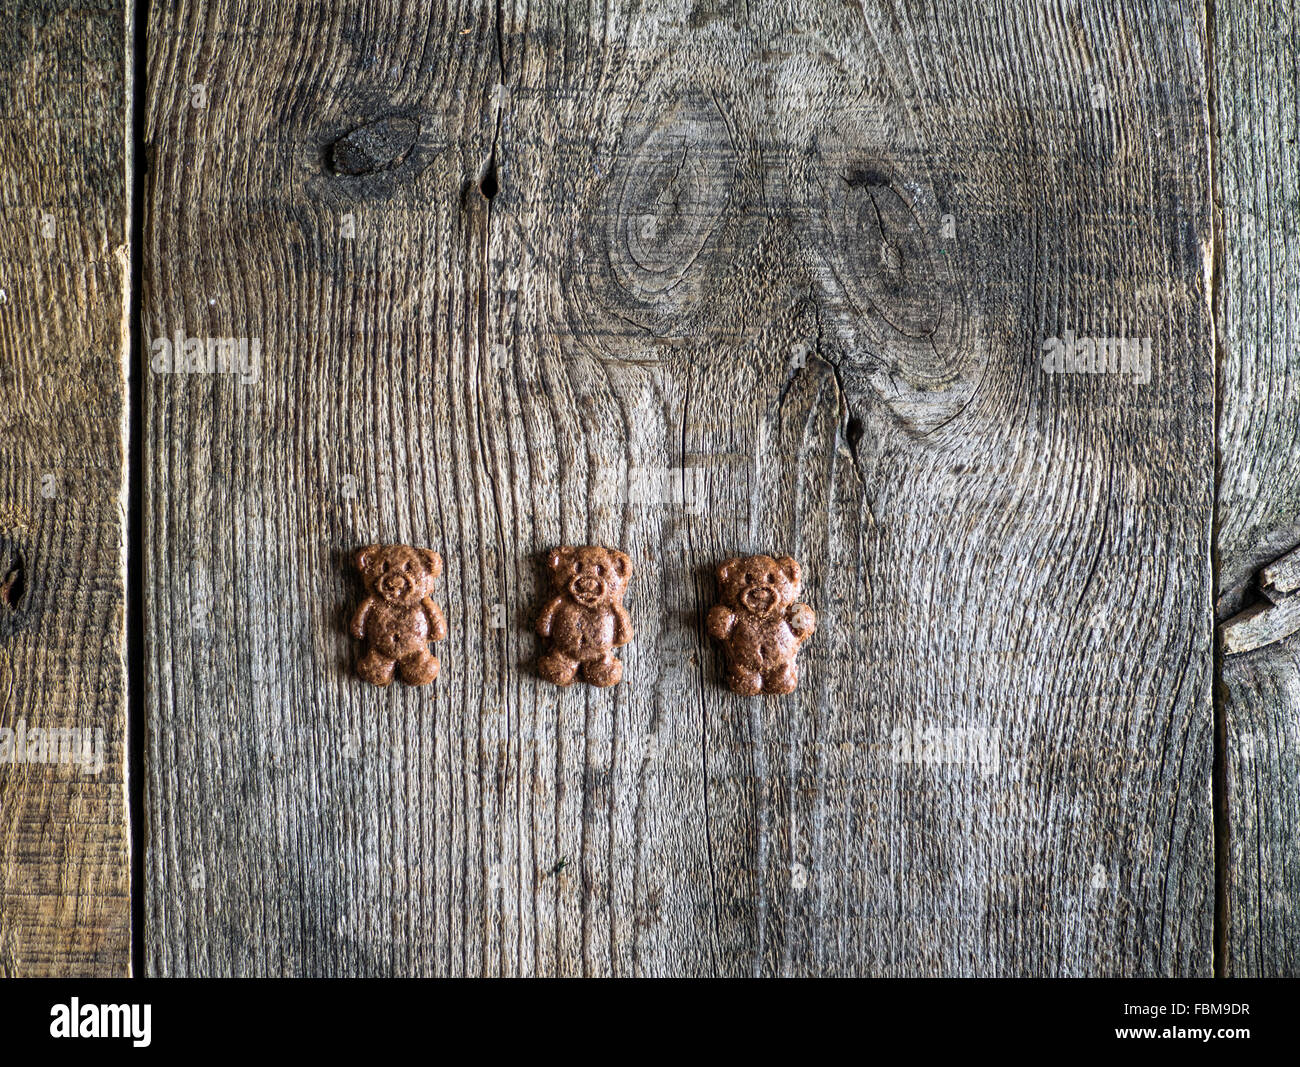 Three chocolate bear cookies on a wooden table Stock Photo